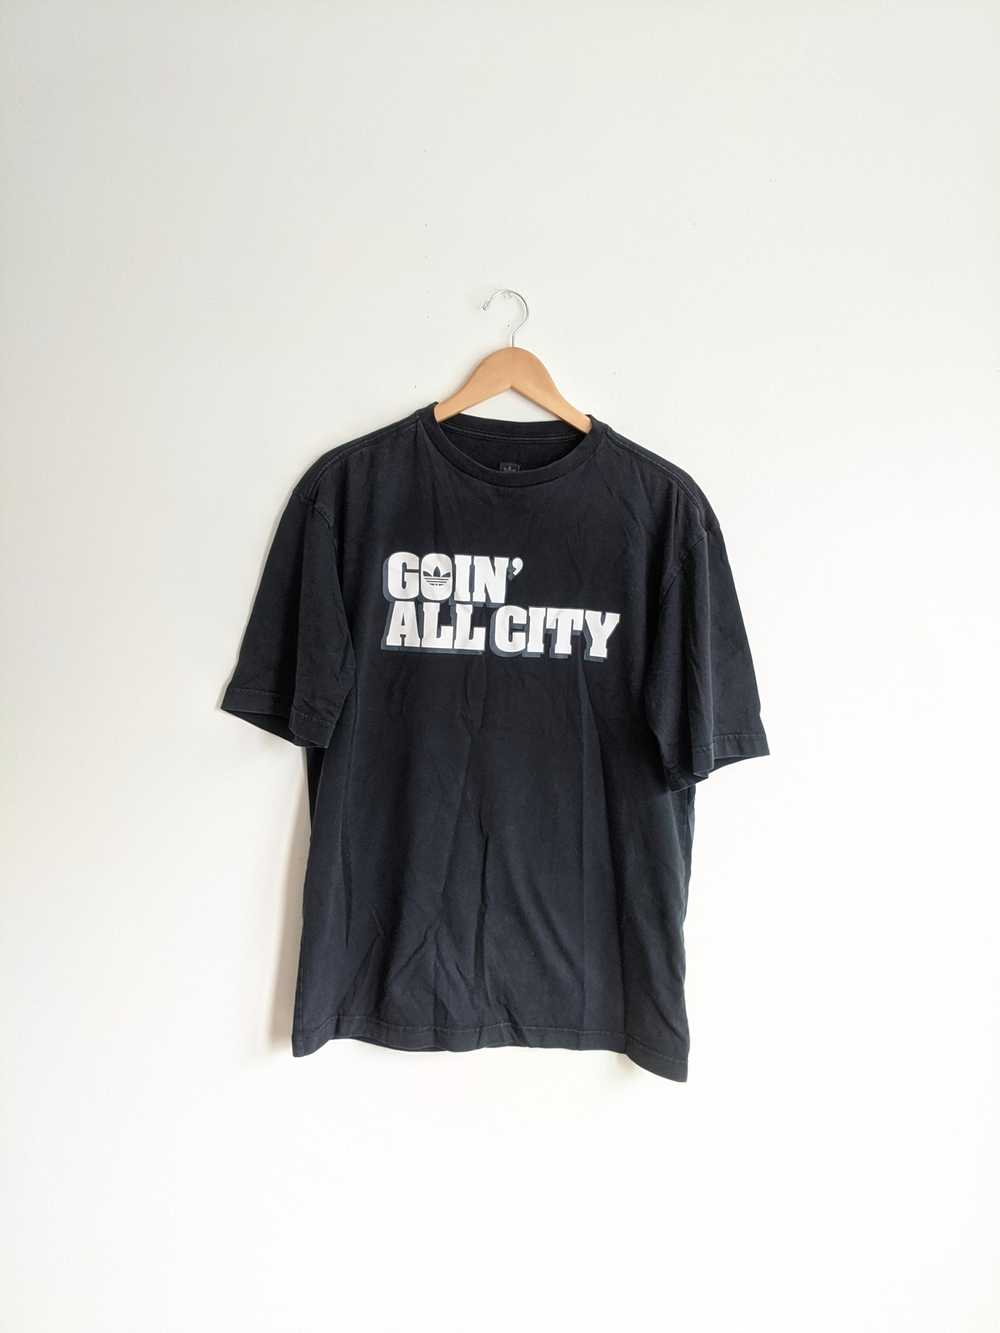 Adidas × Vintage Going all city graphic tee shirt… - image 3